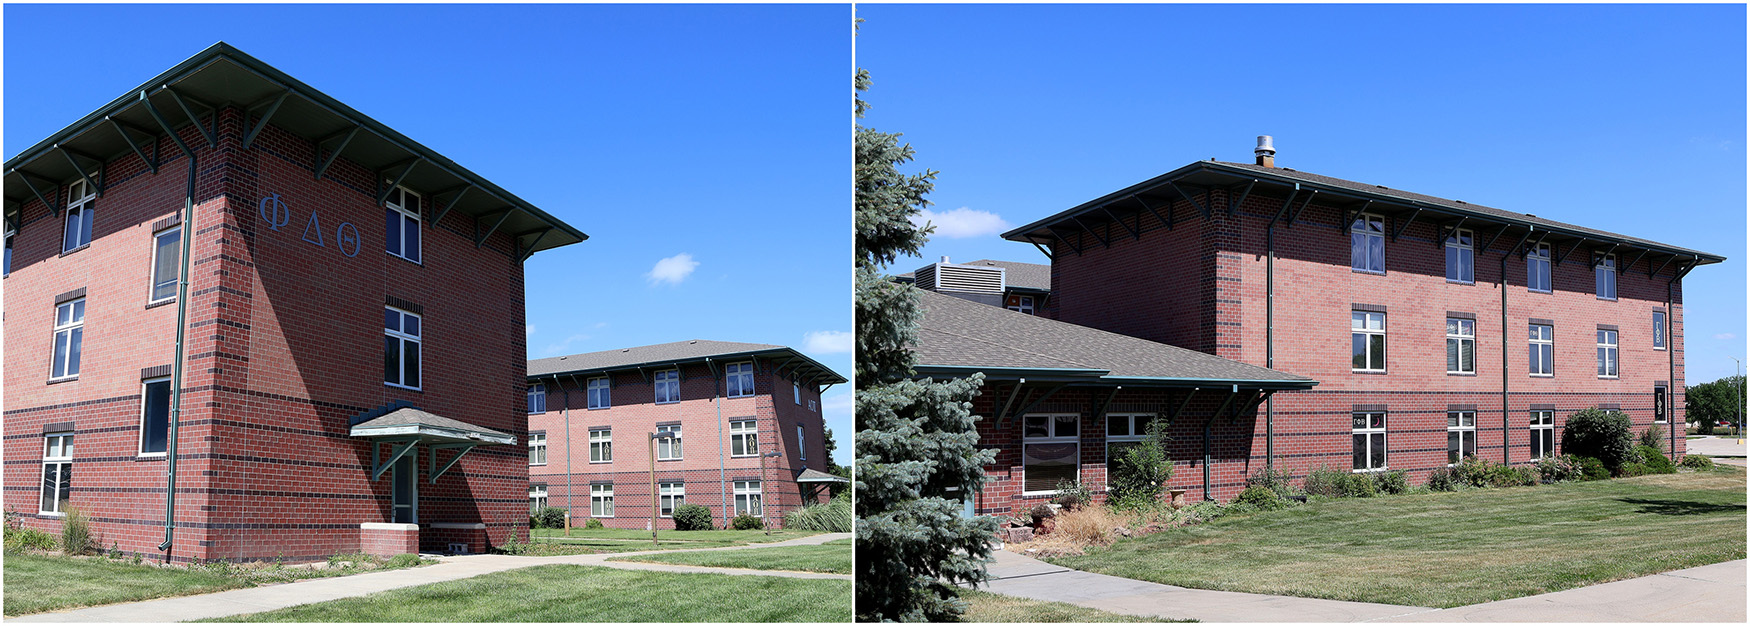 The URS and URN residence halls are scheduled for demolition, with work beginning next week.